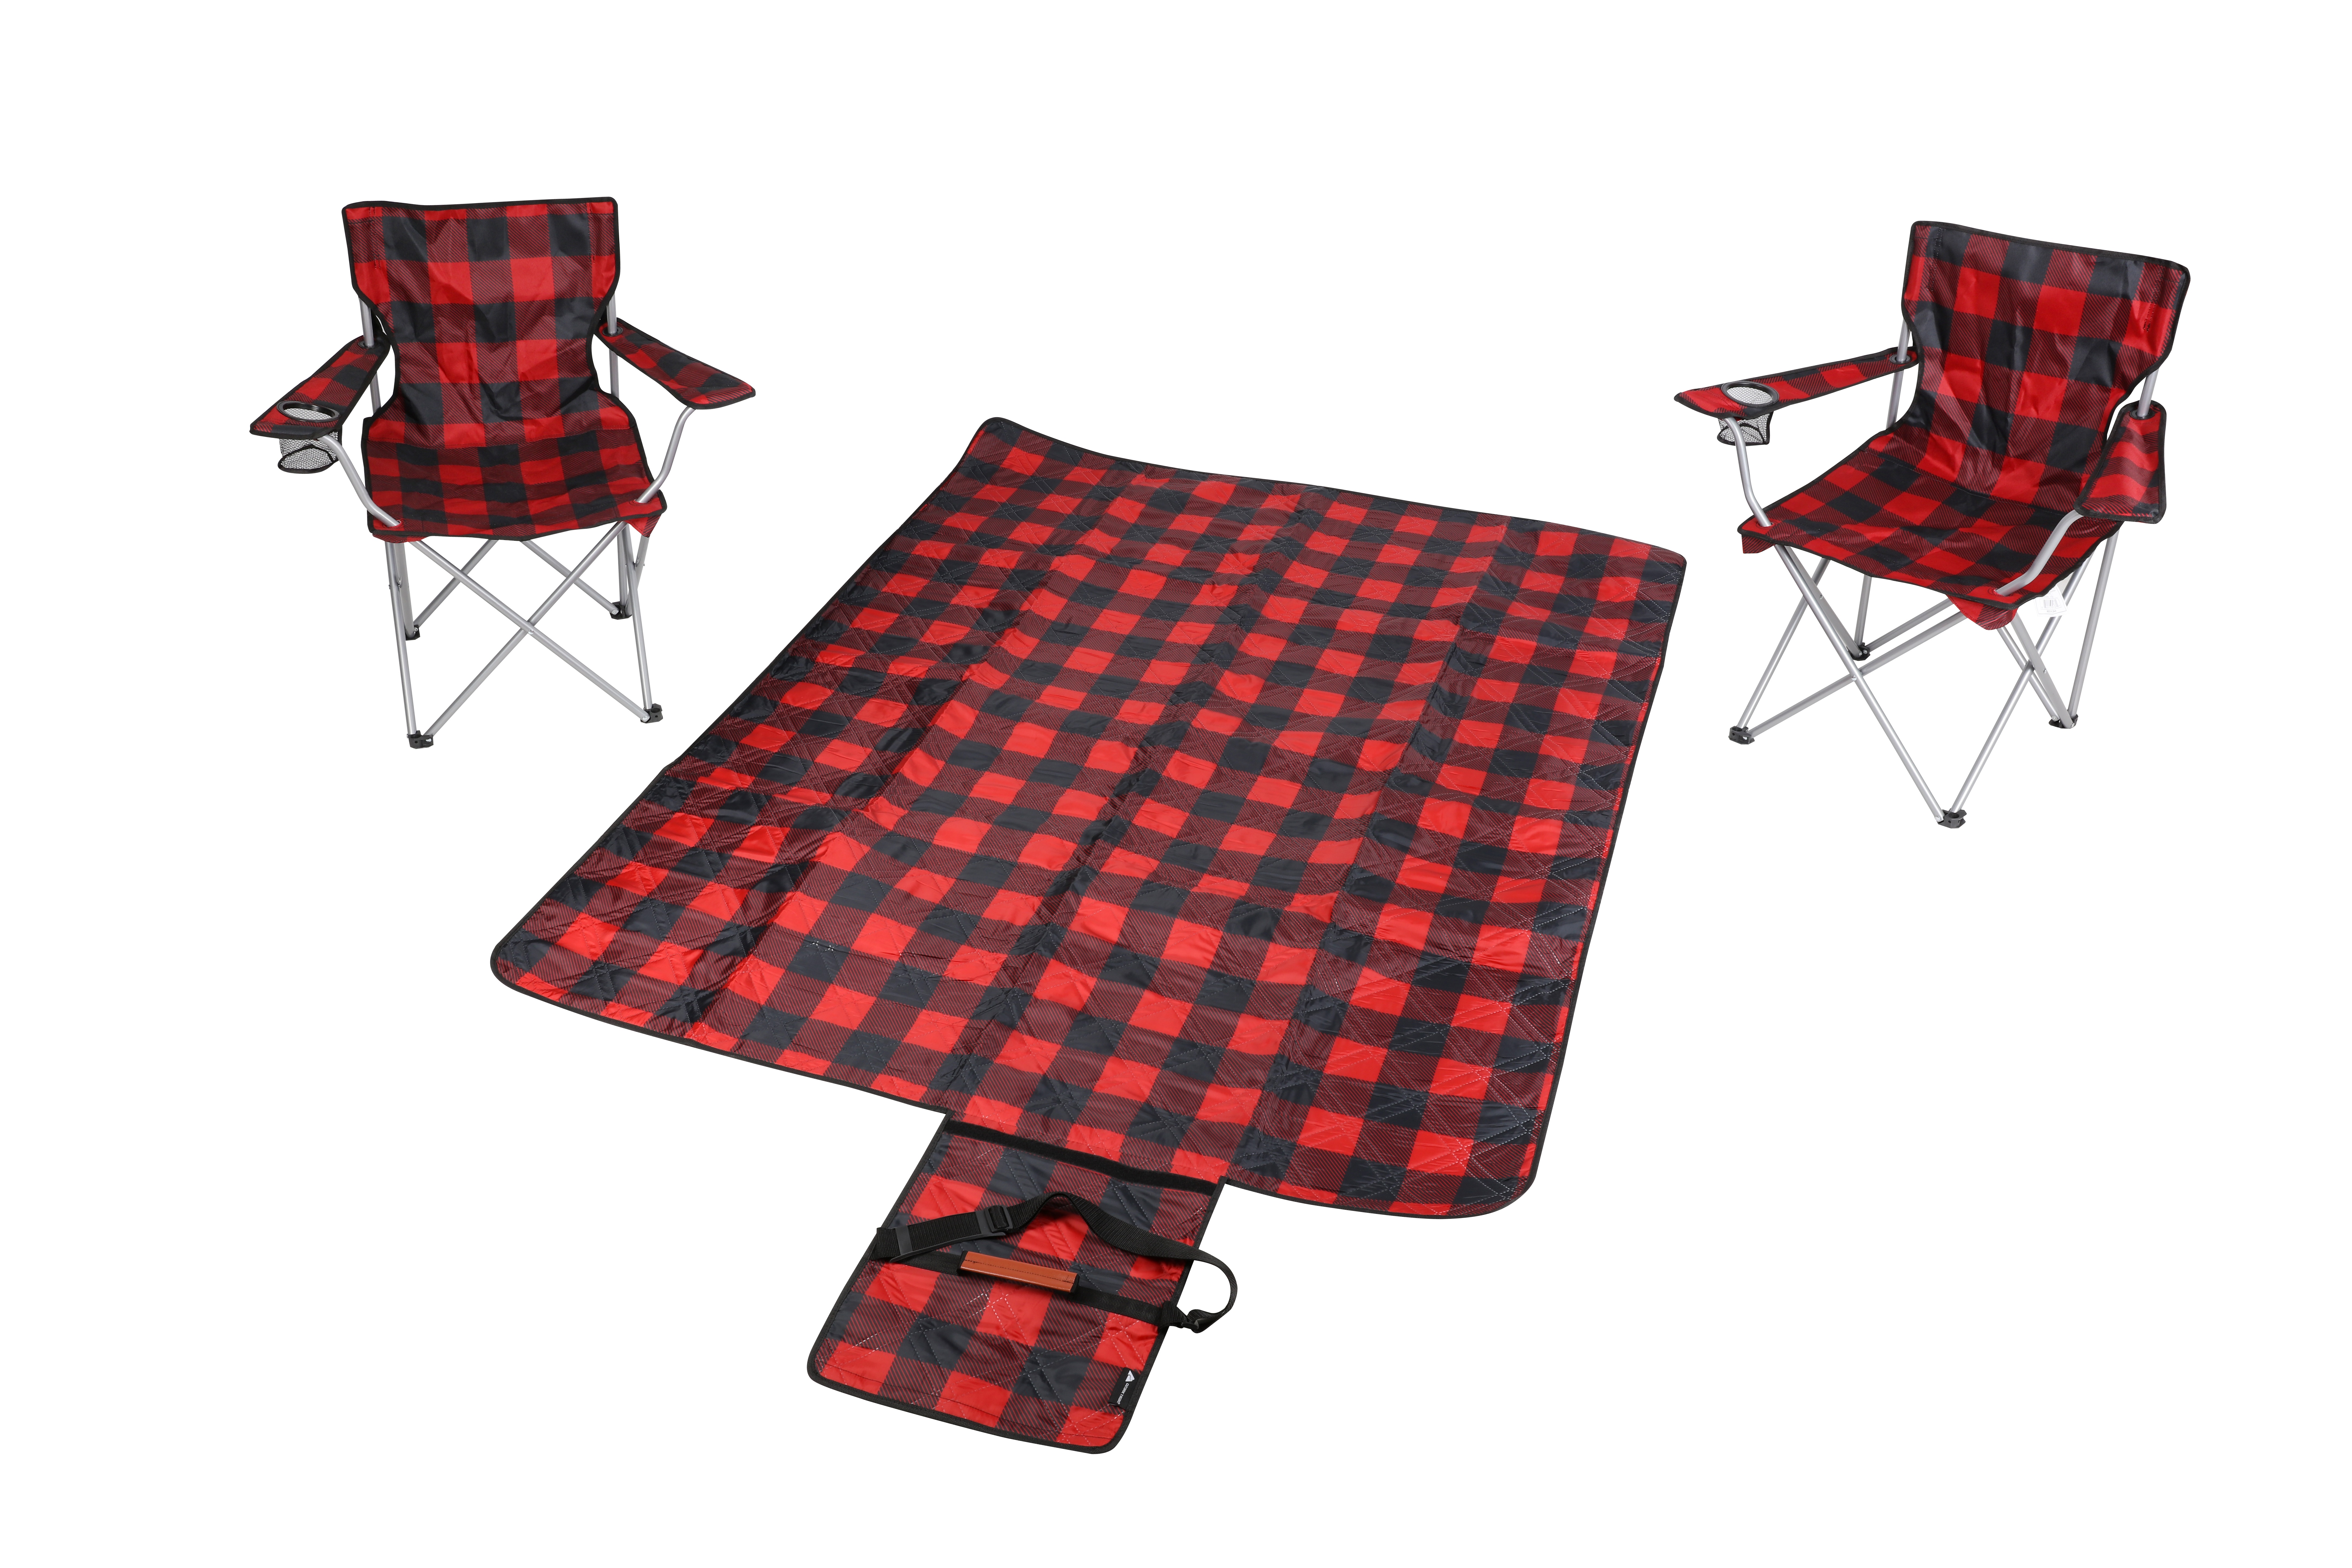 Ozark Trail 3 Piece Buffalo Plaid Camping Chairs and Blanket Combo, Red - image 1 of 6